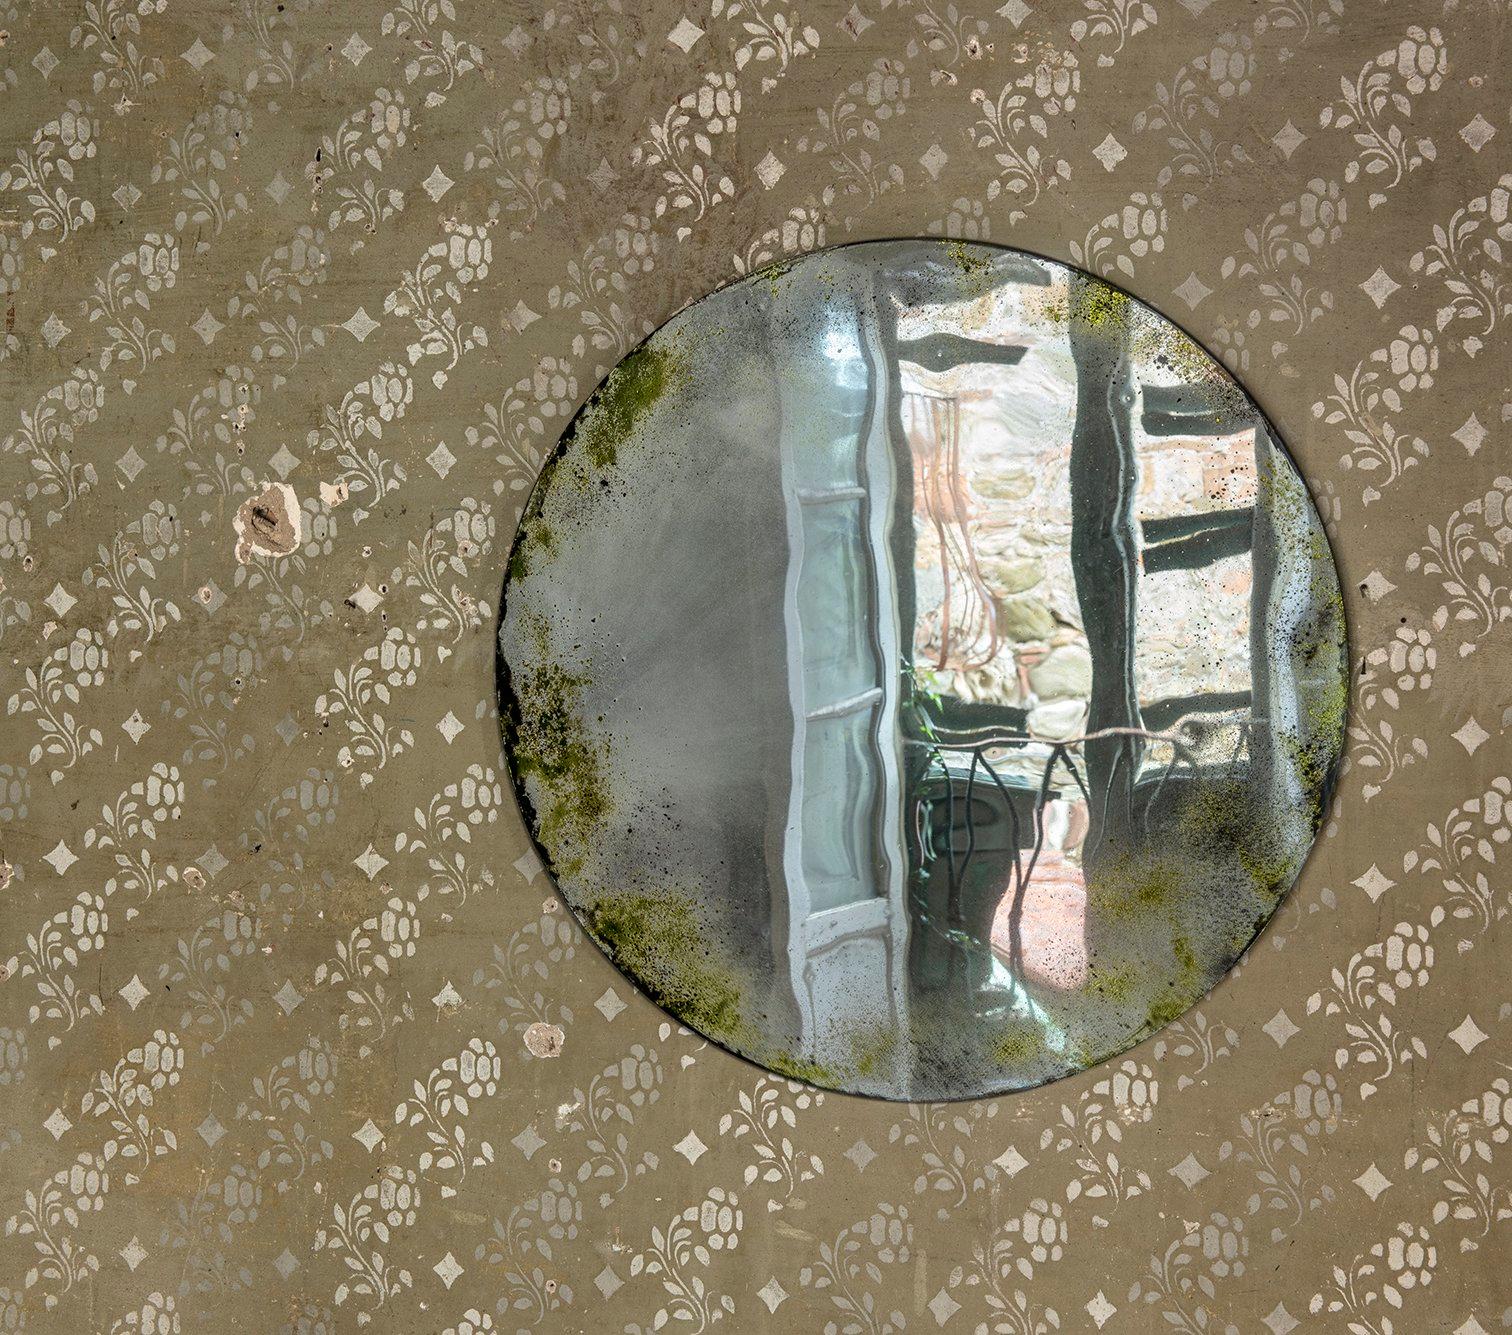 Large Alice mirror by Slow Design 
Dimensions: Diameter 90 cm 
Materials: Glass. gold/ grey/ blue/ moss green /MDF on back side oxidation effect on the clear mirror.
Technique: Grisaille.
Available in gold/moss green/blue/black. Also available in